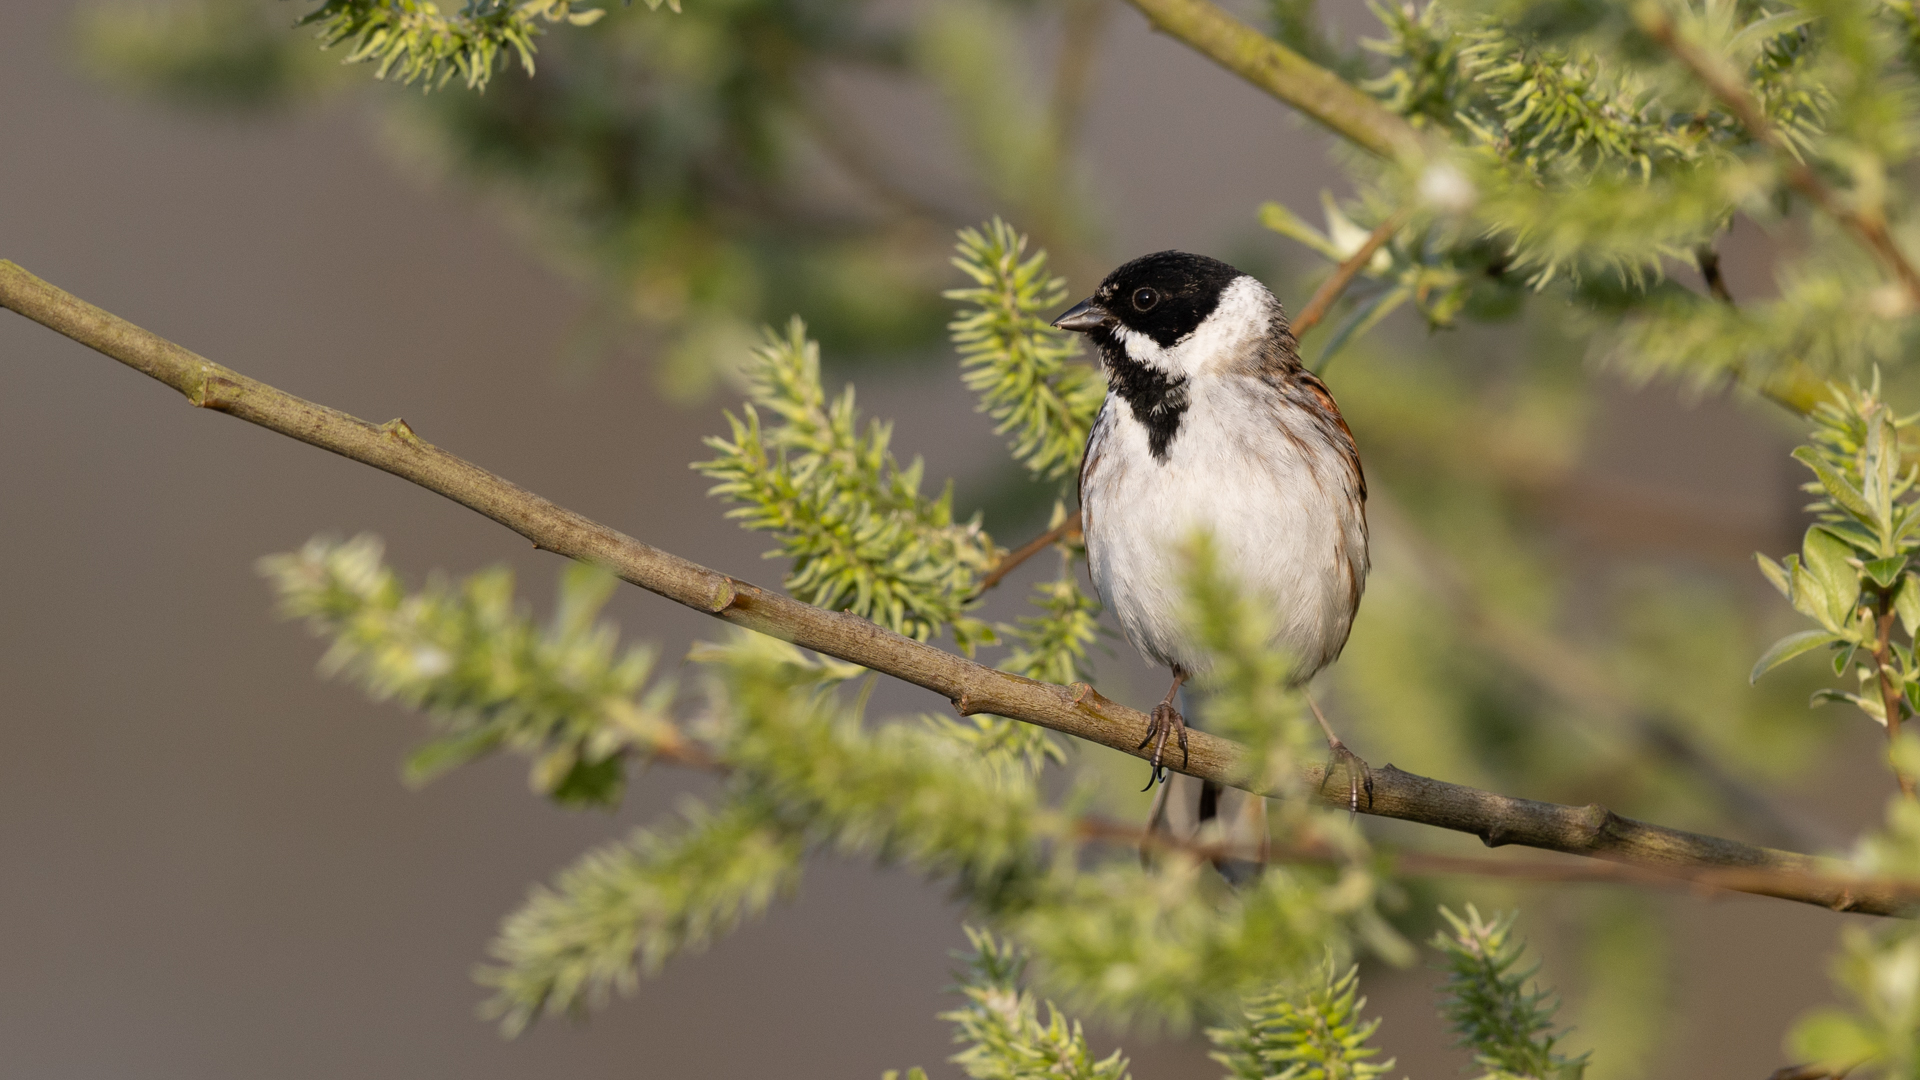 Photograph of a Reed Bunting perched on a branch.